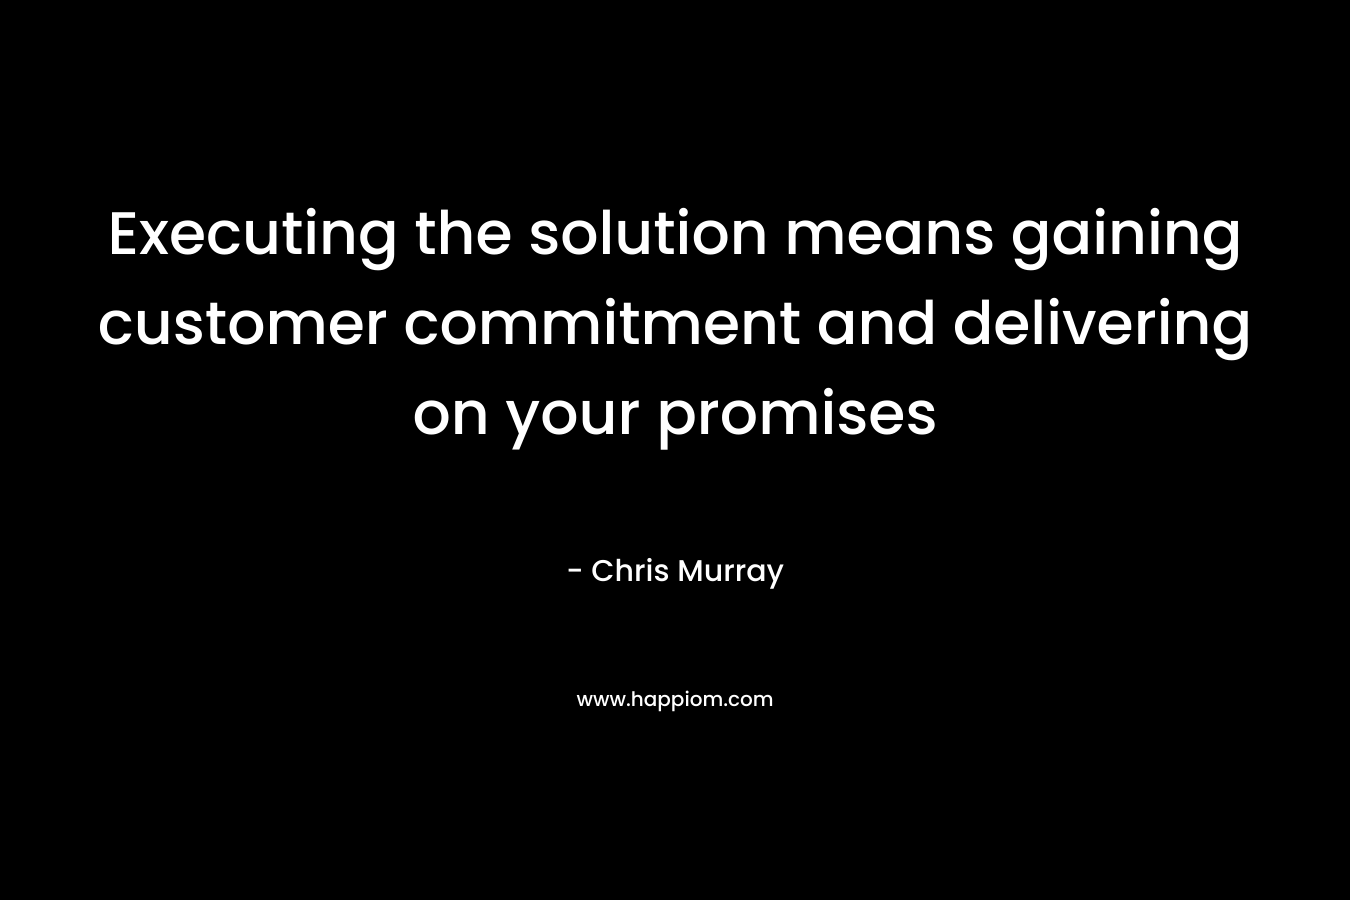 Executing the solution means gaining customer commitment and delivering on your promises